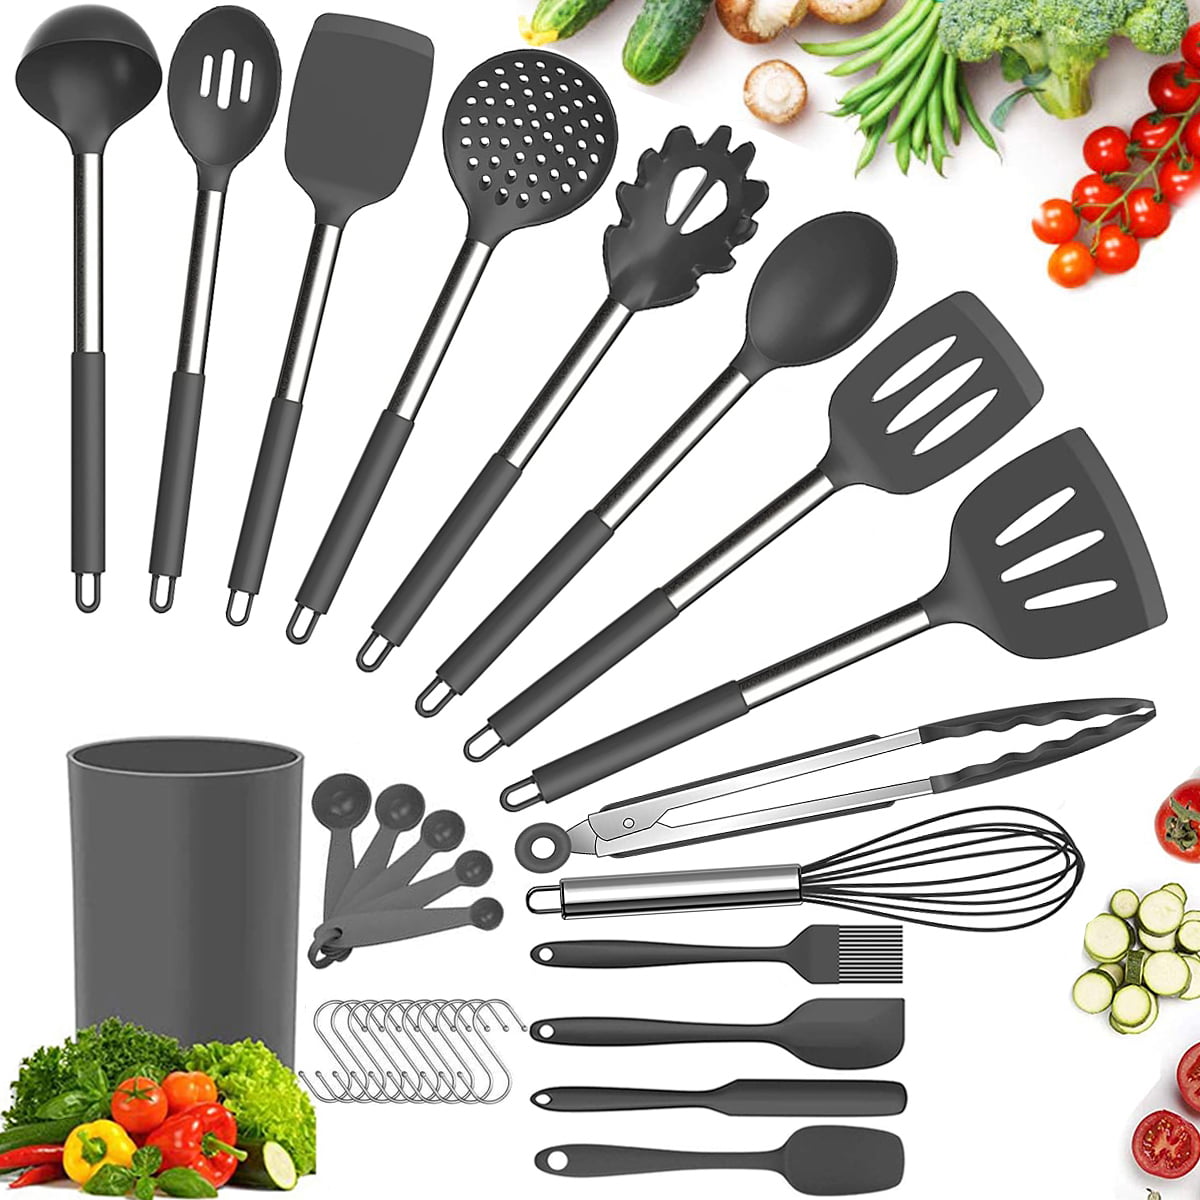 Silicone Kitchen Cooking Utensils Set 12 Pcs Non stick Heat Resistant Cookware